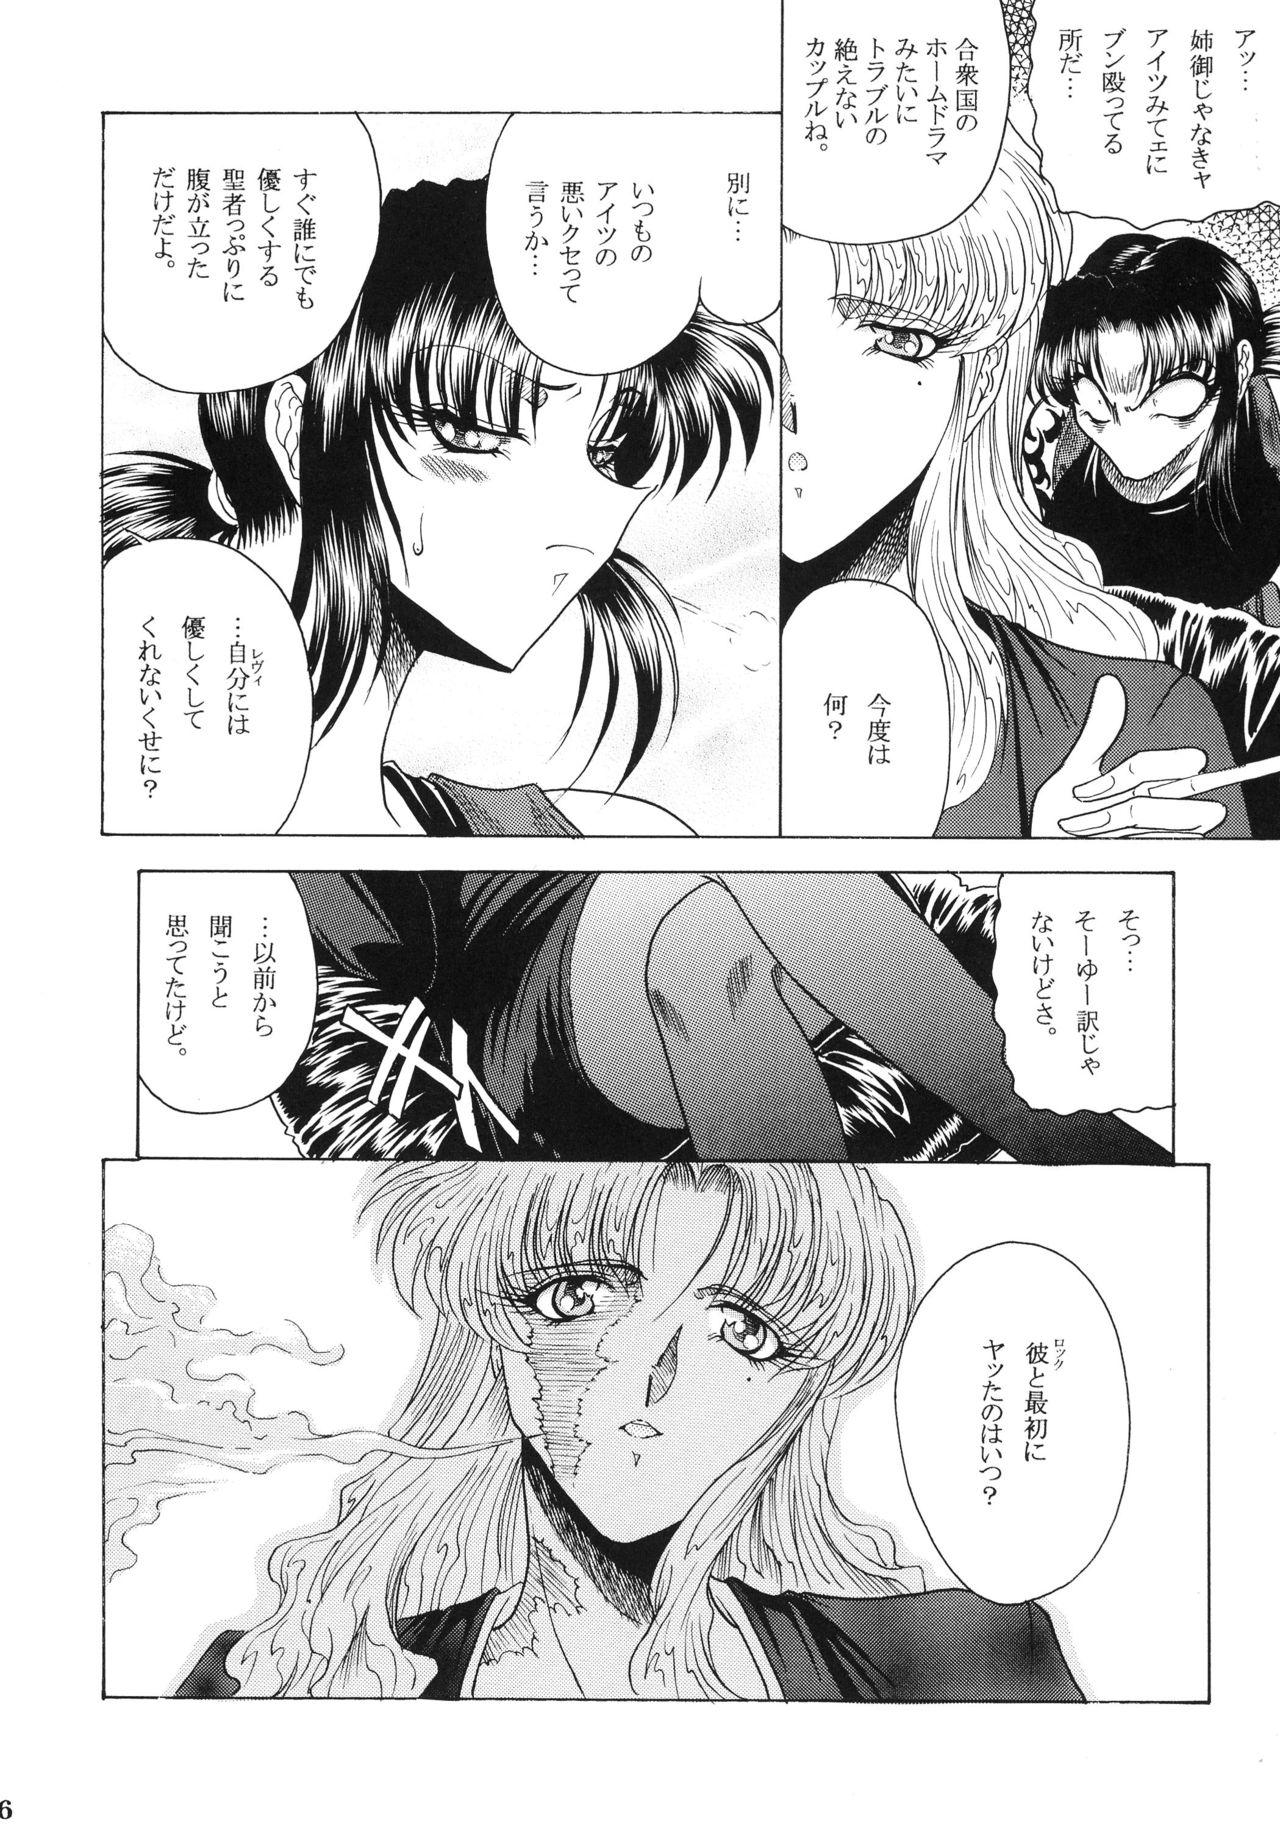 Massage ZONE 38 China Syndrome - Black lagoon Sex Toys - Page 5